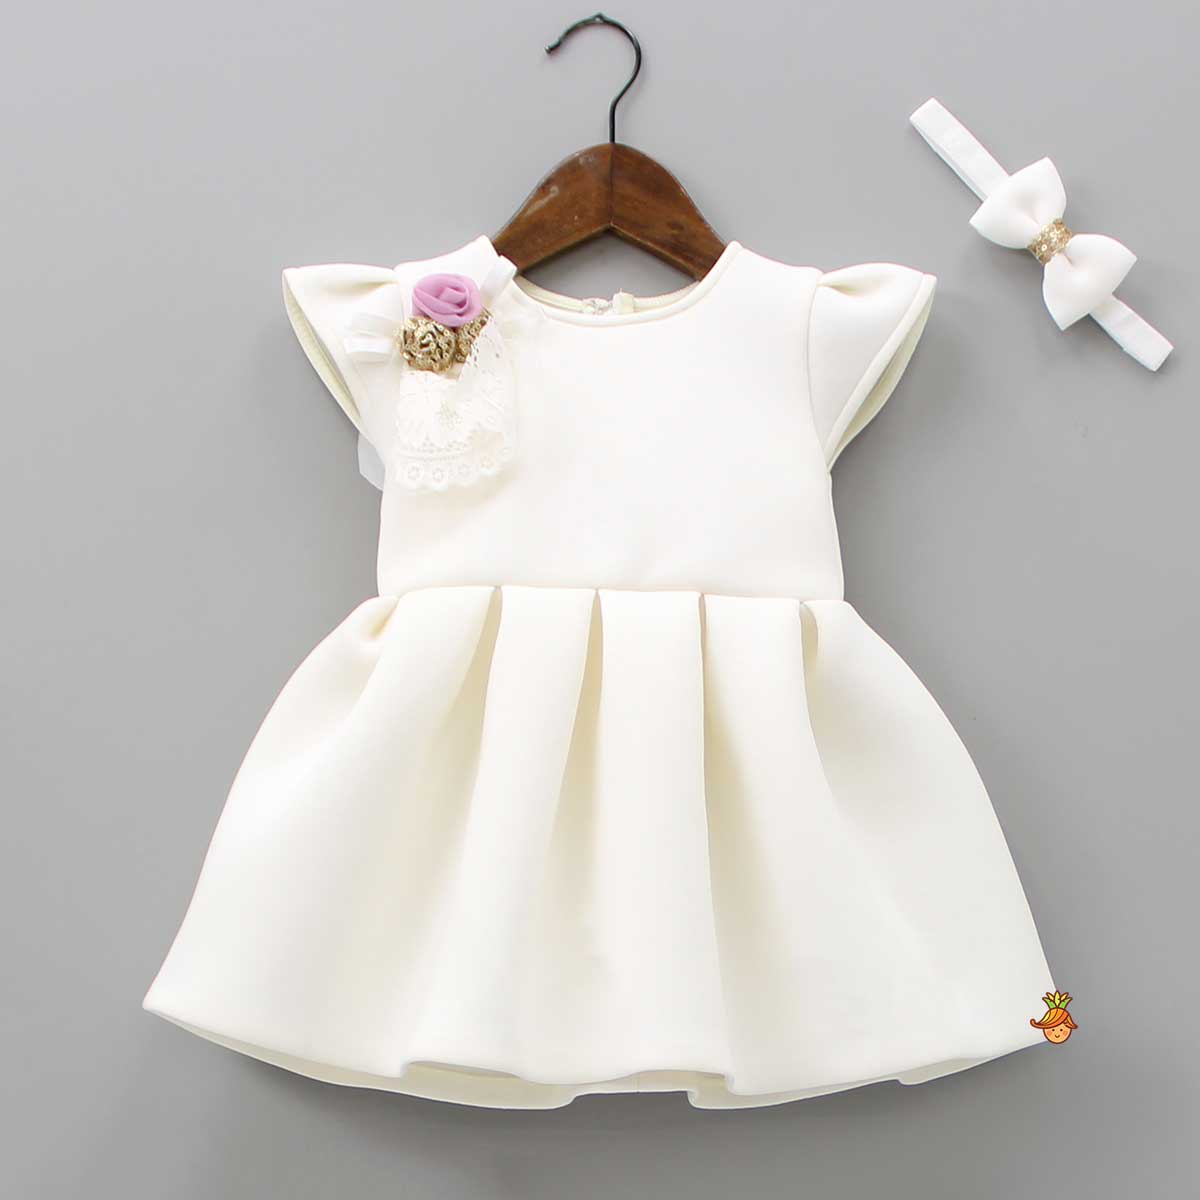 Fancy Off White Scuba Dress With Matching Bow Head Band